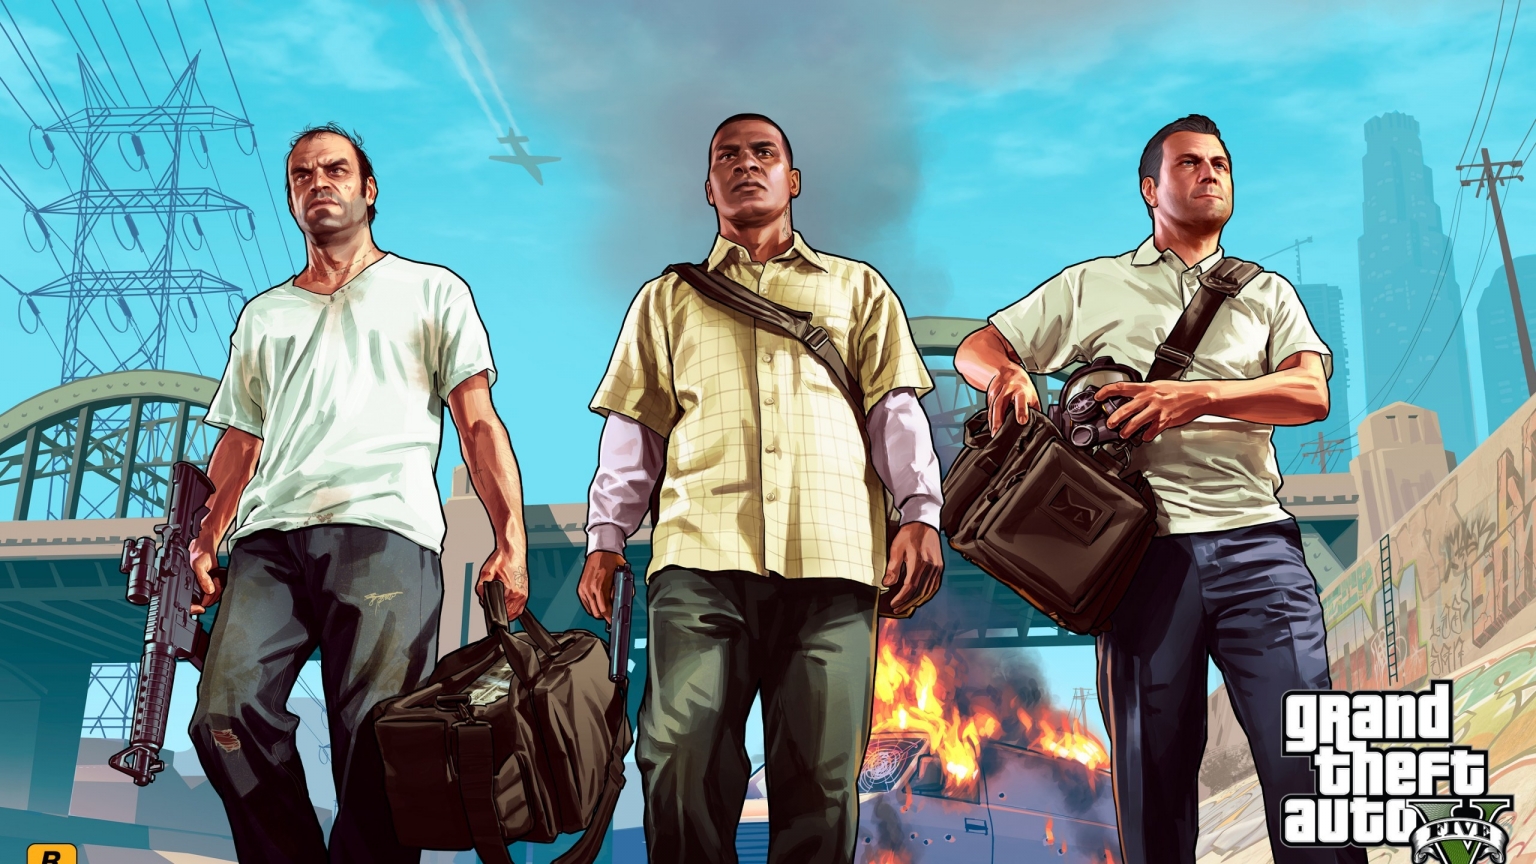 Grand Theft Auto Vice City for 1536 x 864 HDTV resolution